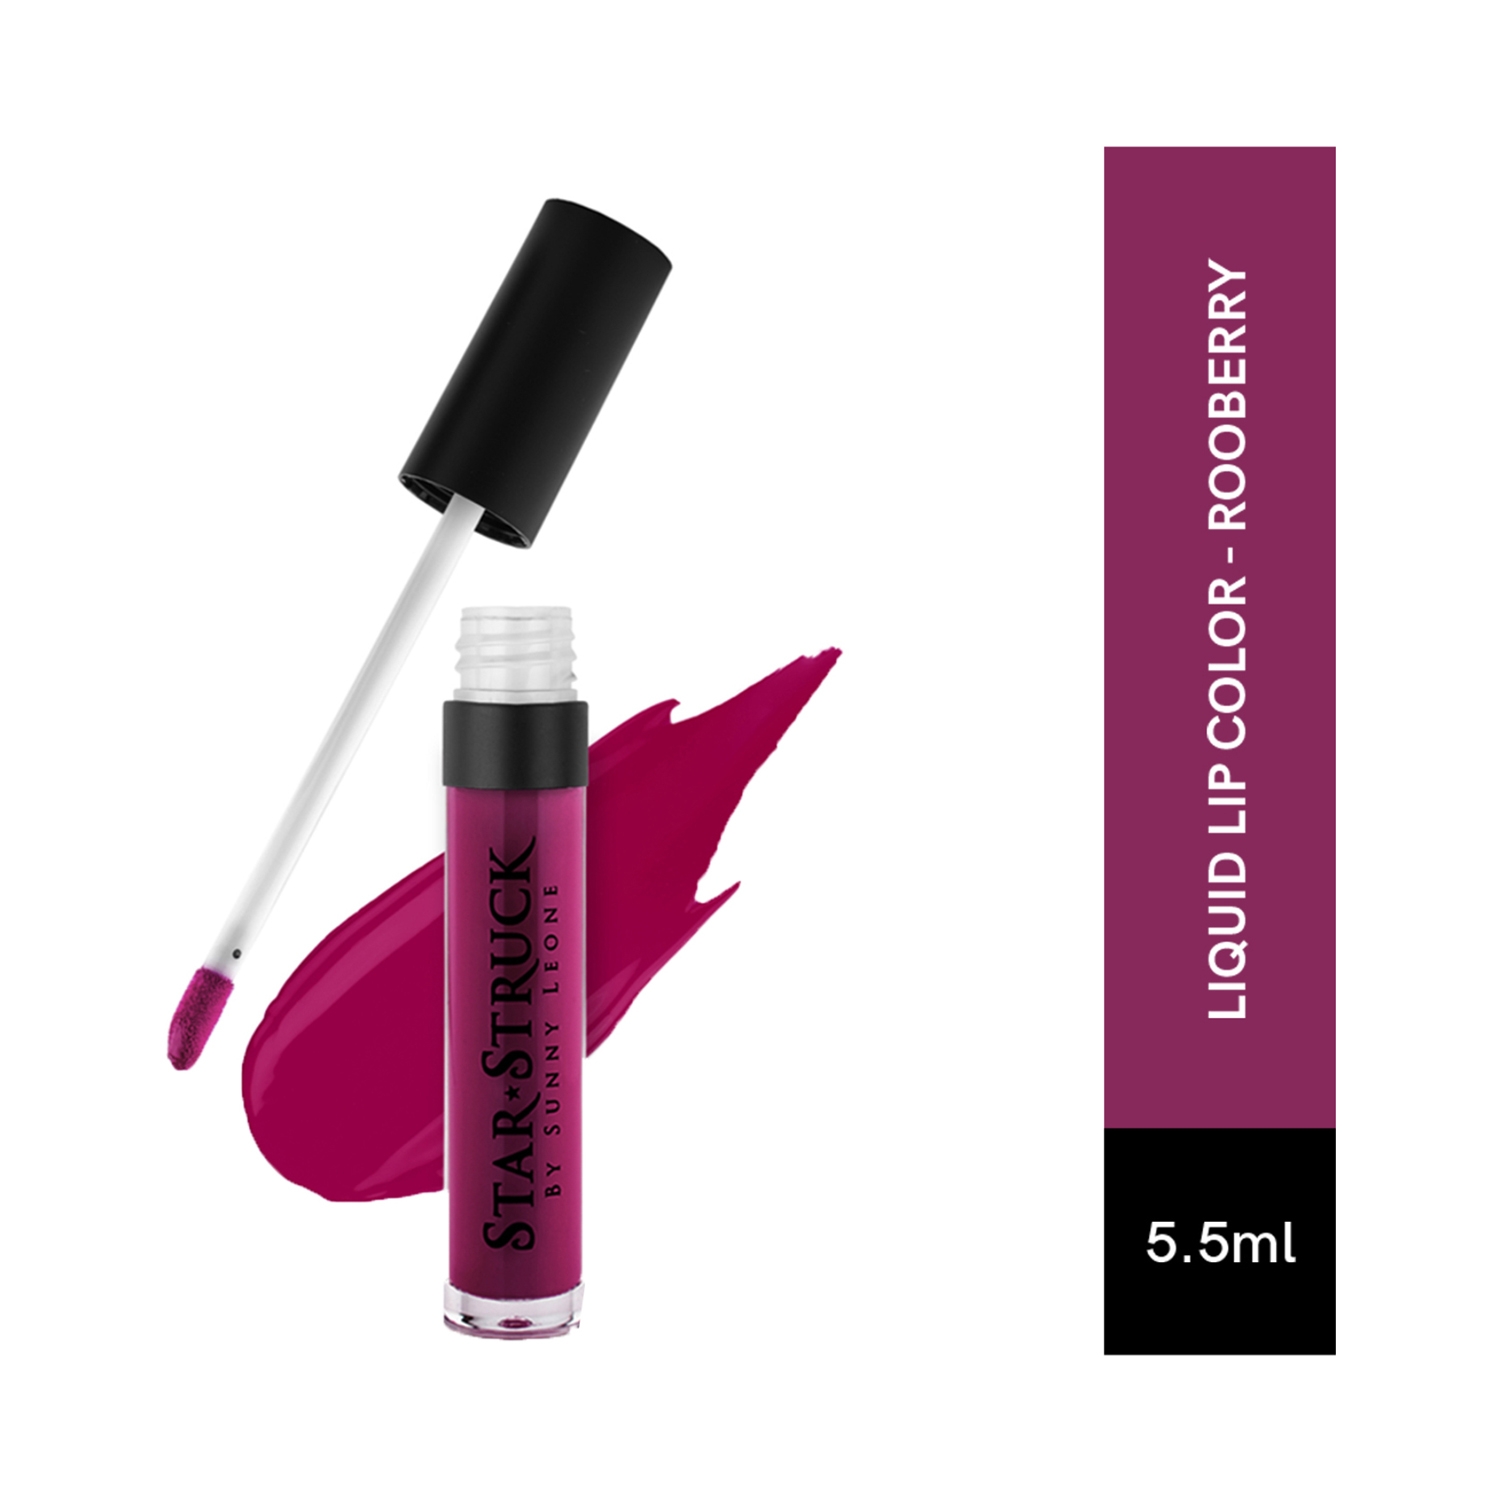 Star Struck by Sunny Leone | Star Struck by Sunny Leone Liquid Lip Color - Rooberry (5.5ml)